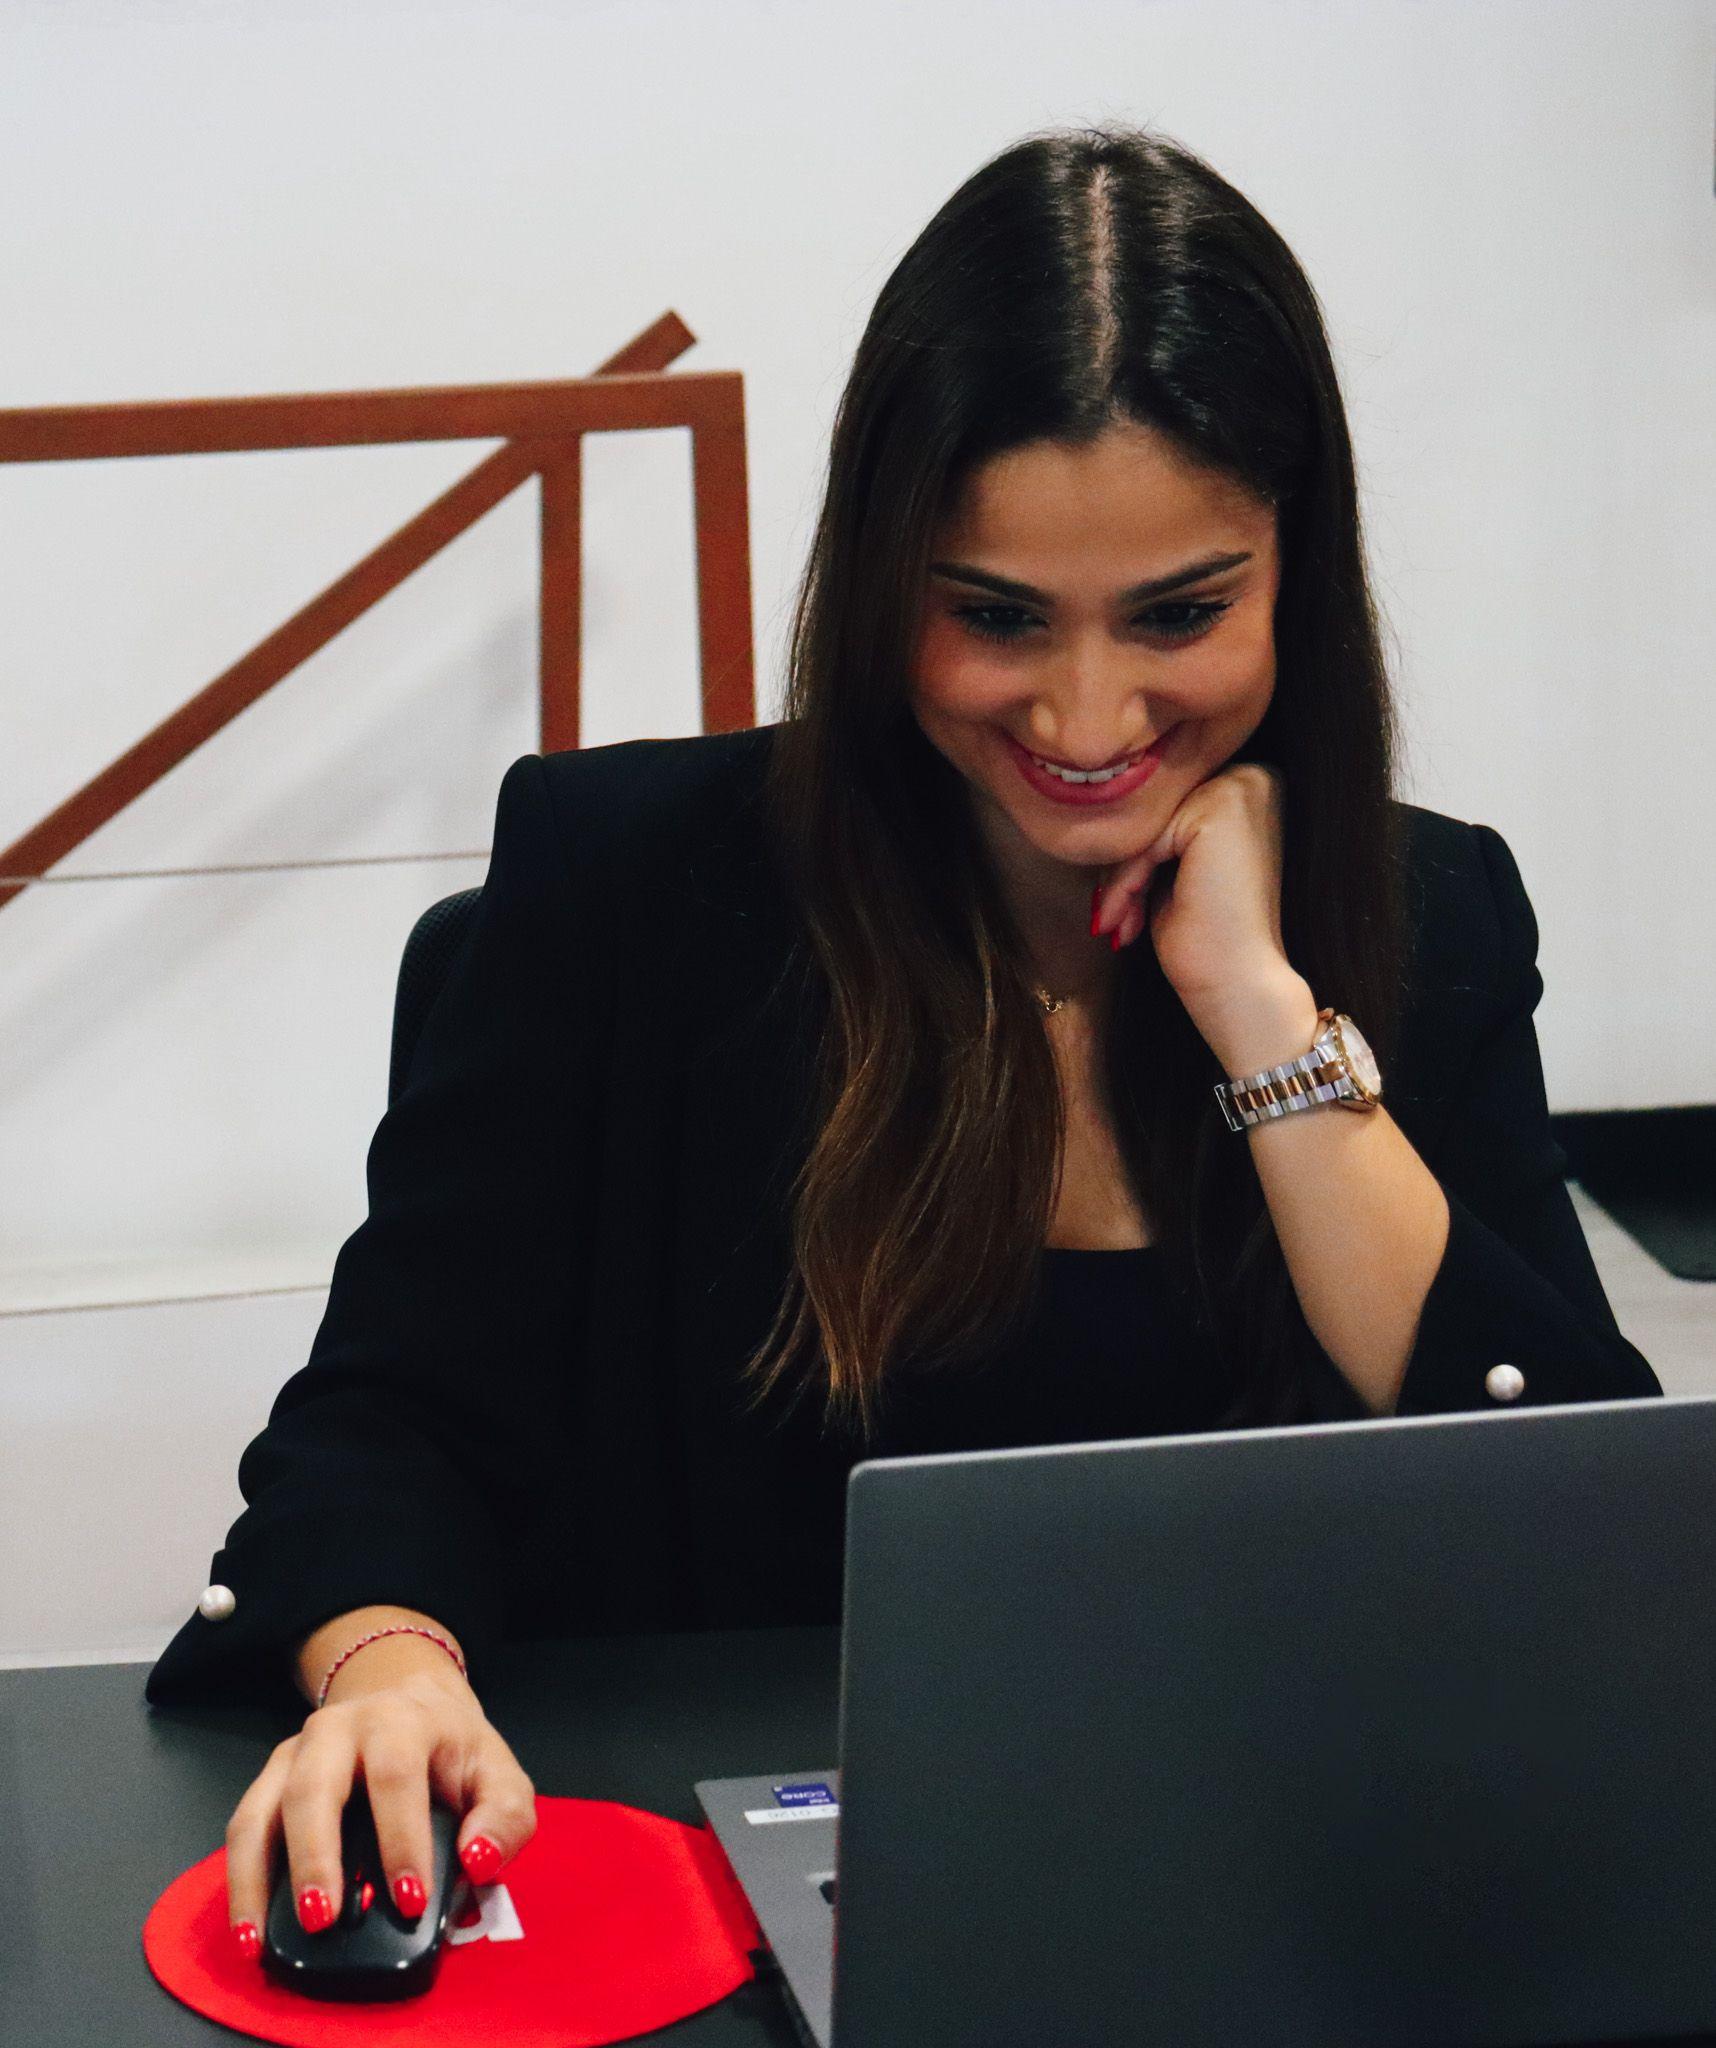 young woman working on the computer with a big smile, dressed in black and with red lipstick. In the background, we can see the office in shades of white and wood.